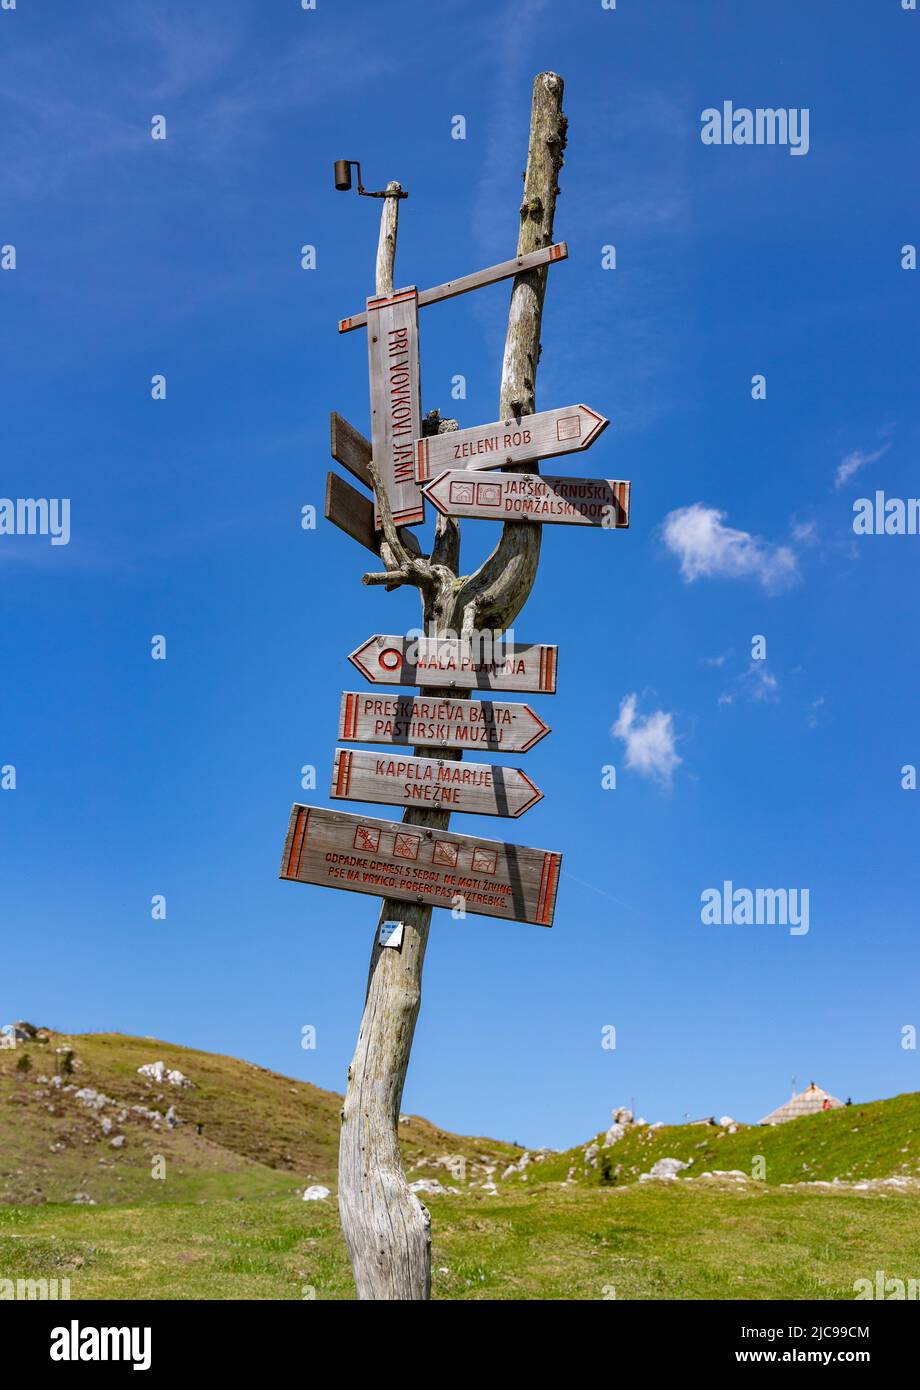 A picture of a directions sign on Velika Planina, or Big Pasture Plateau. Stock Photo